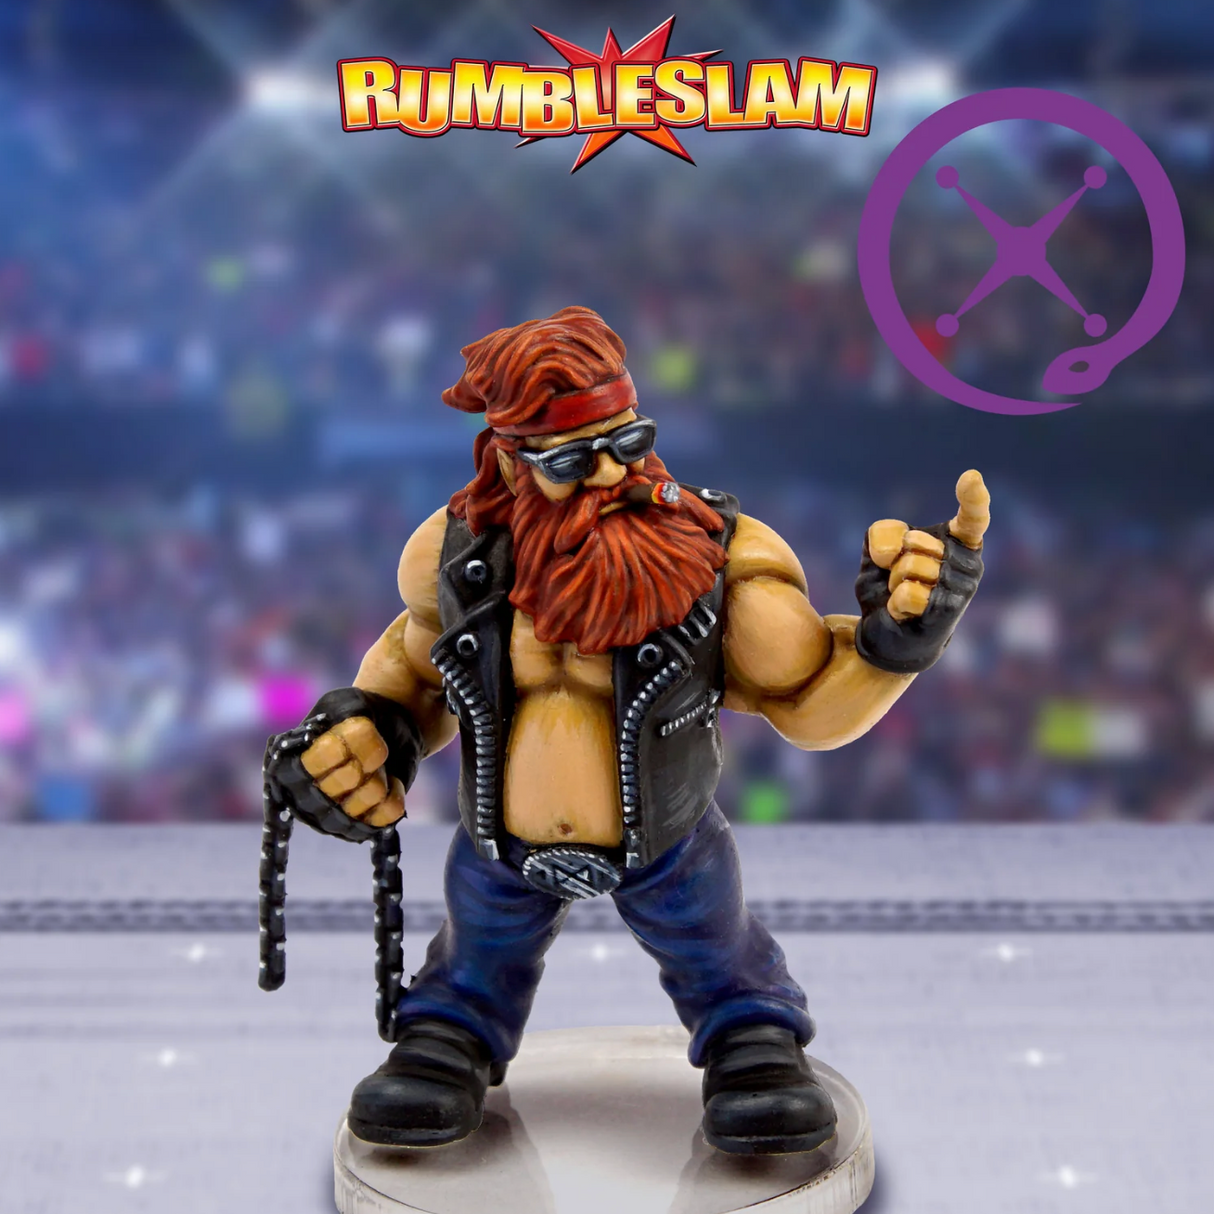 Rumbleslam: Lord of Anarchy